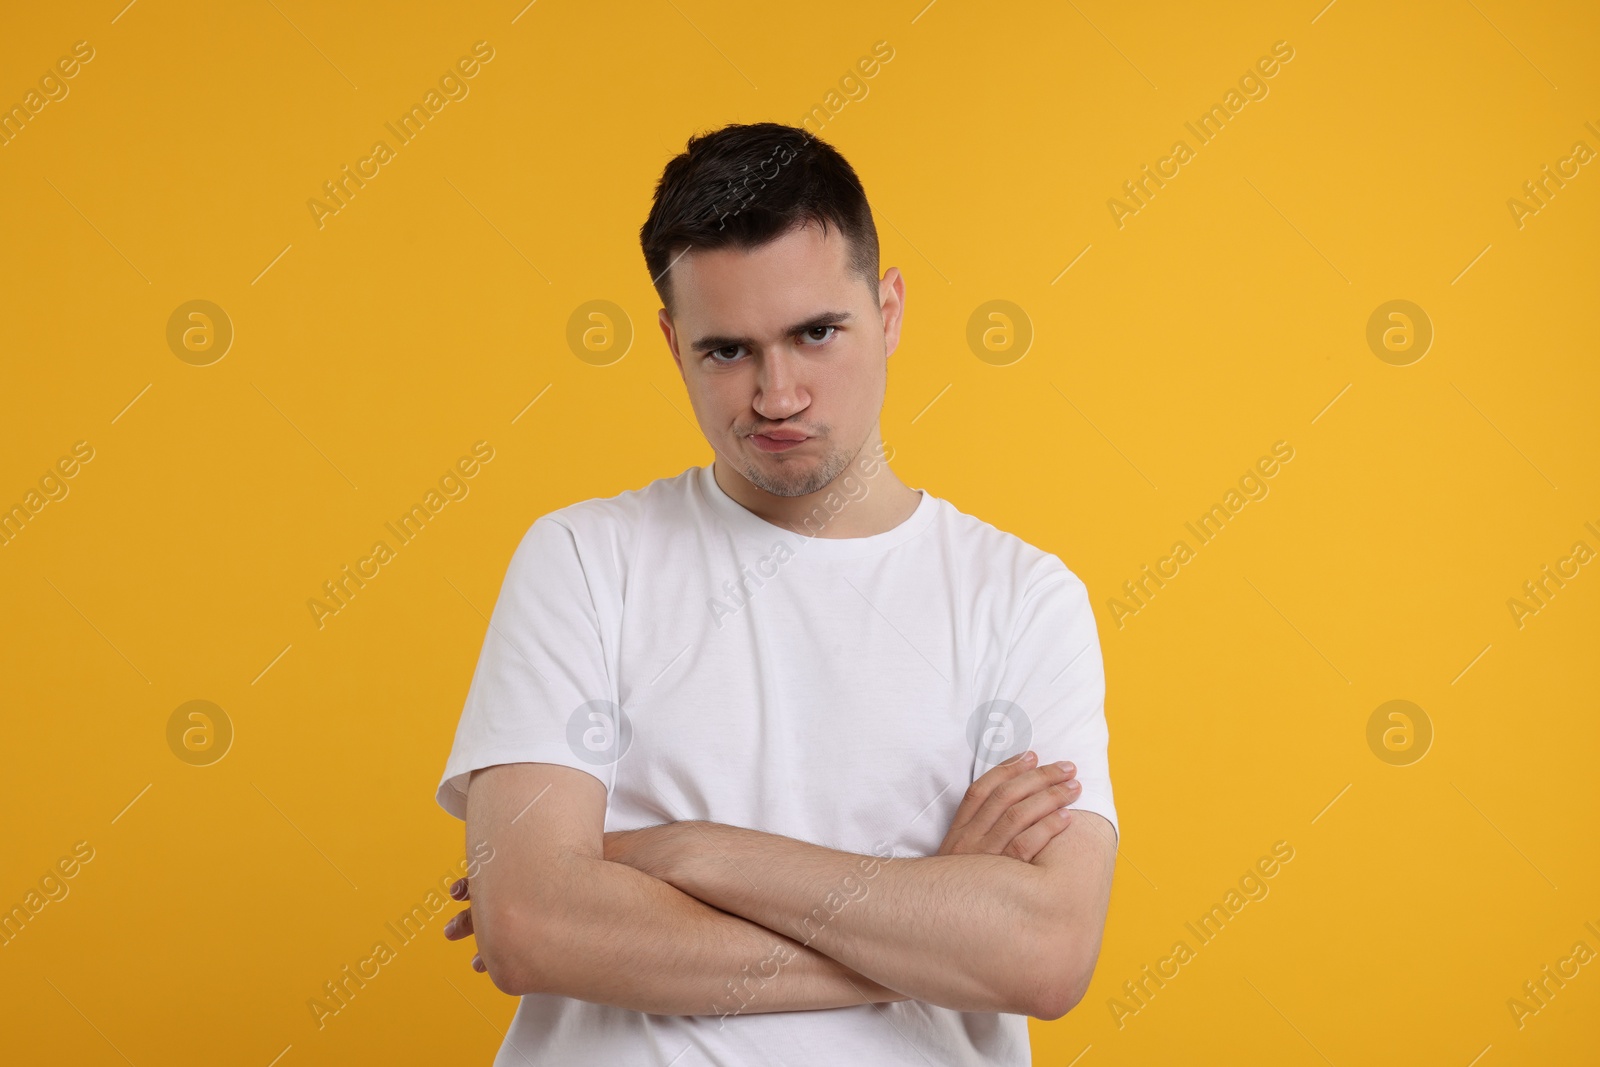 Photo of Resentful man with crossed arms on orange background